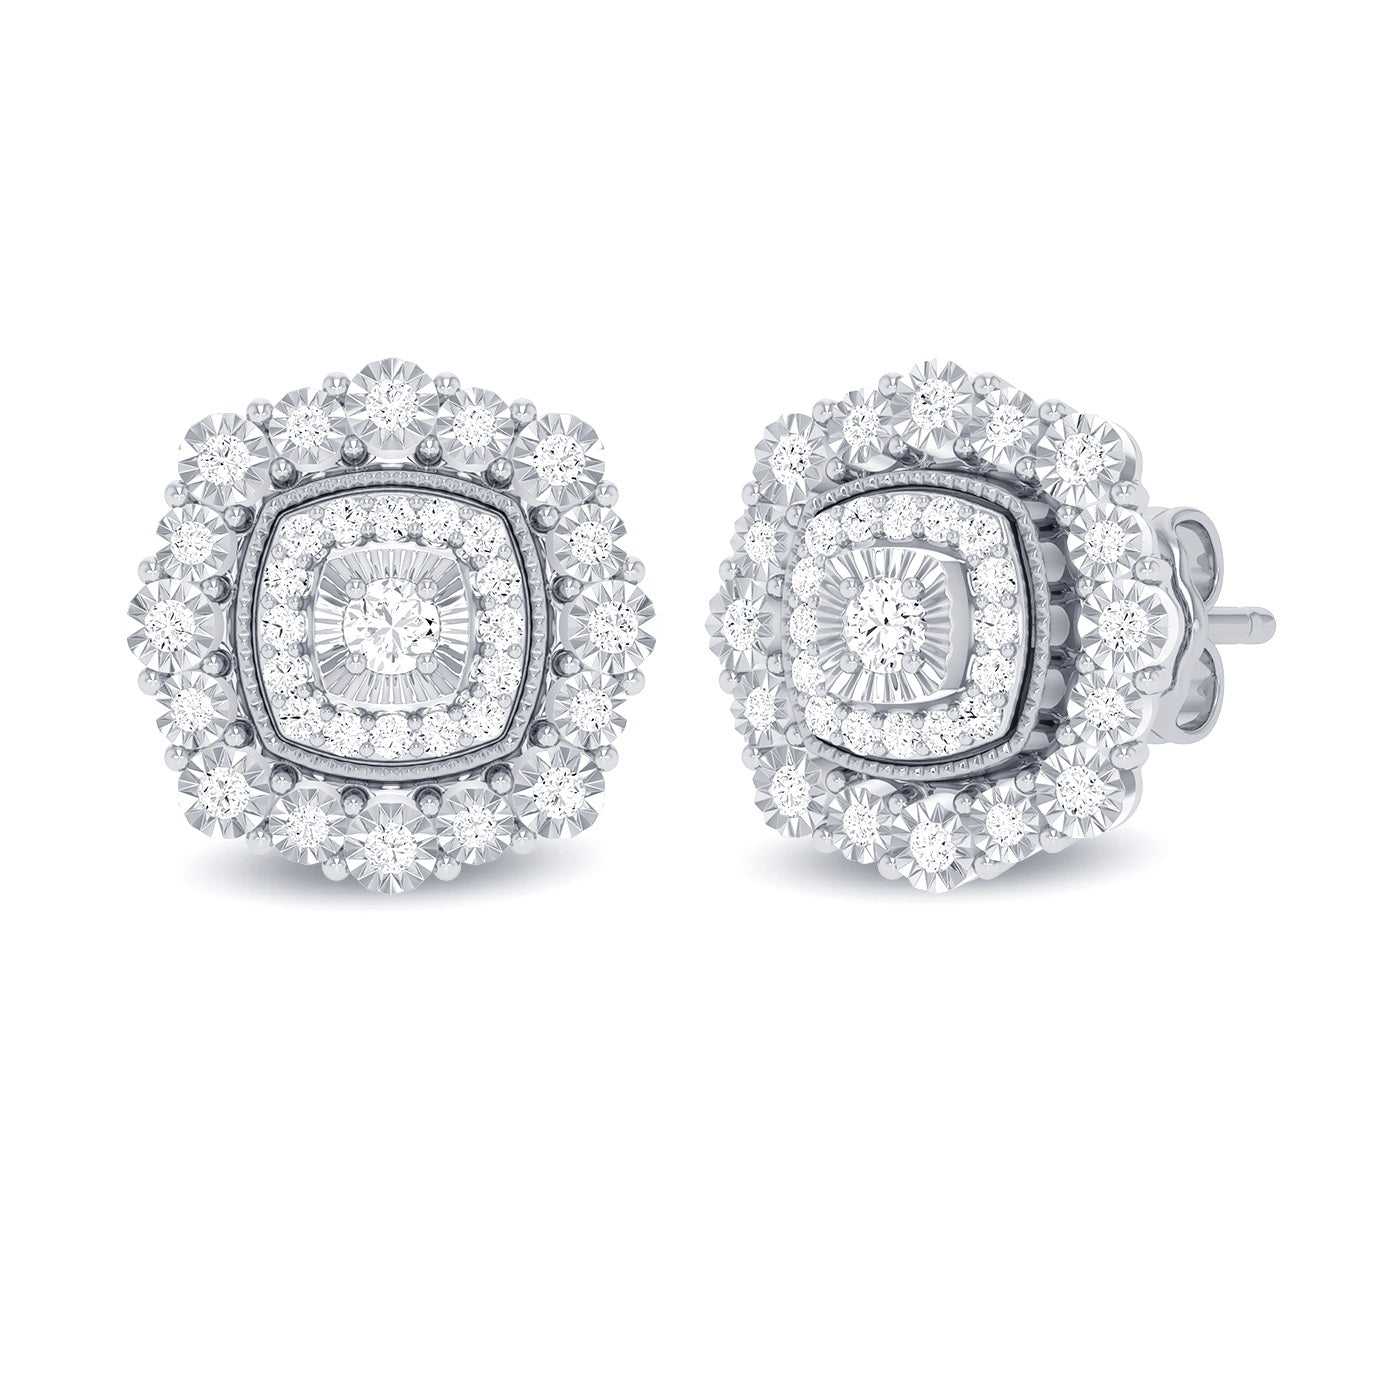 Miracle Little Halo Earrings with 0.15ct of Diamonds in 9ct White Gold Earrings Bevilles 